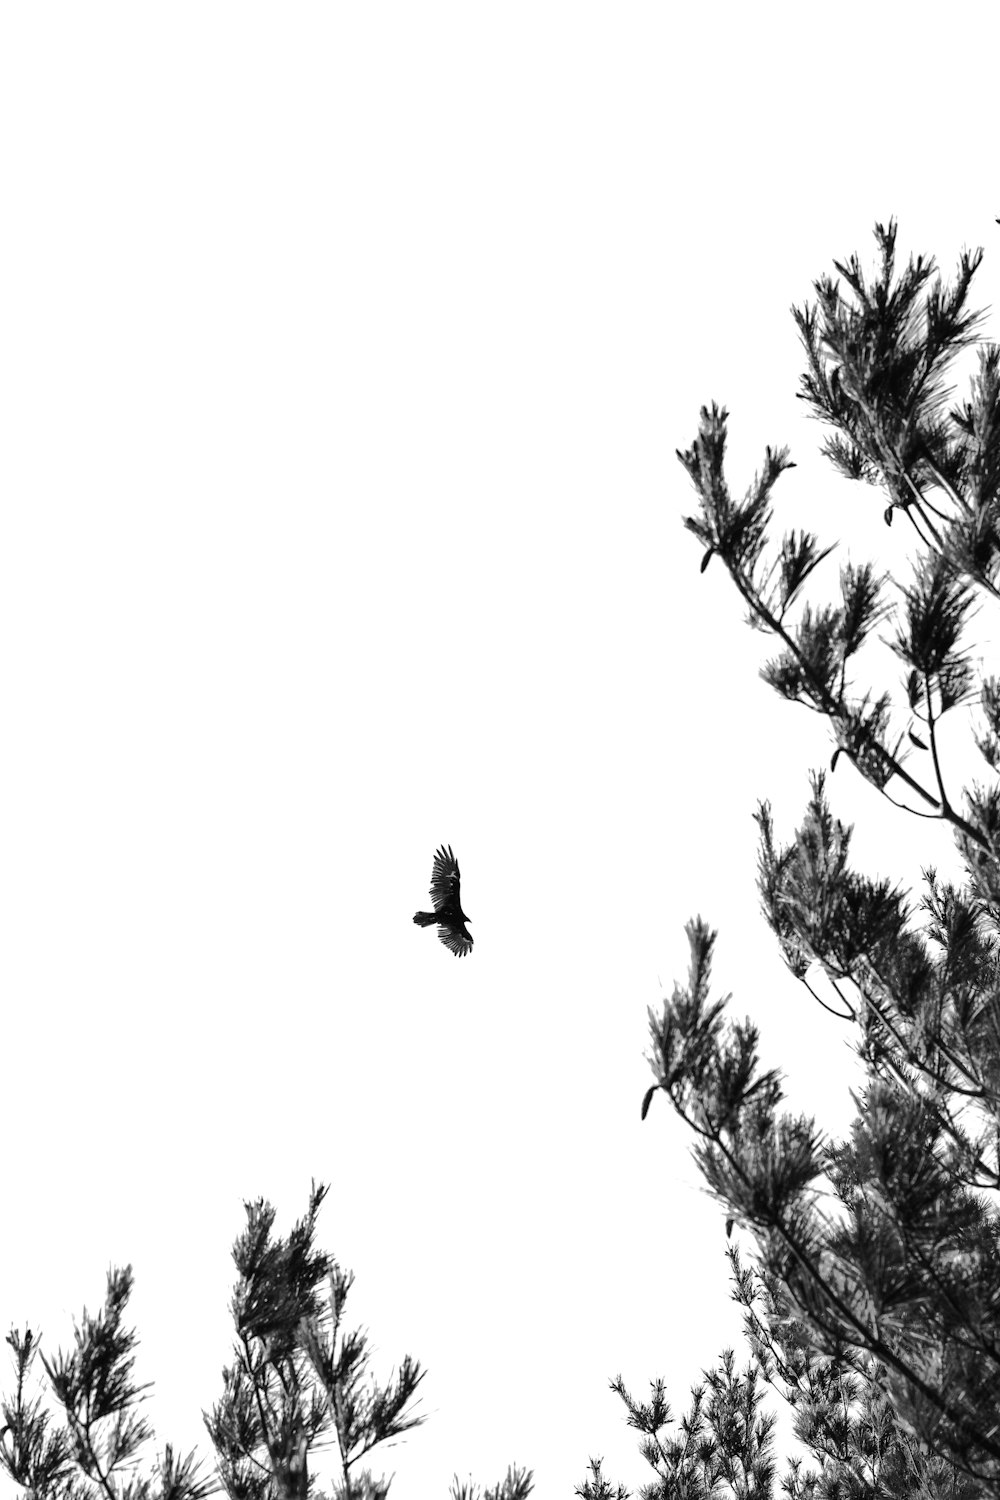 a black and white photo of a bird flying in the sky